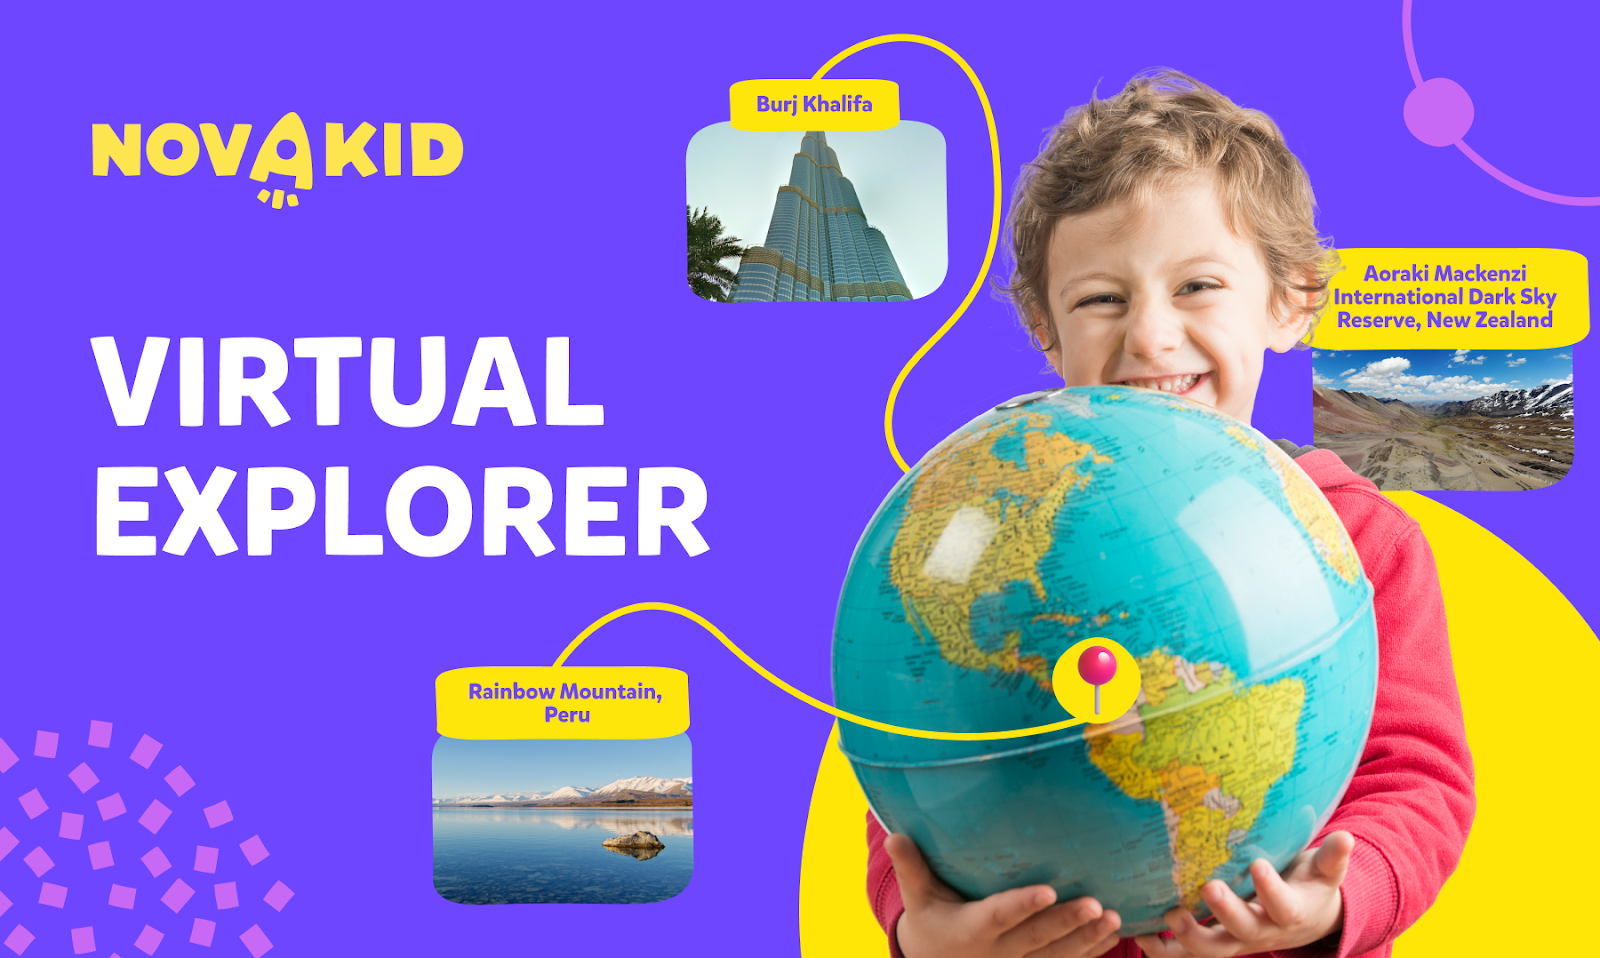 How does Novakid apply virtual reality in education?